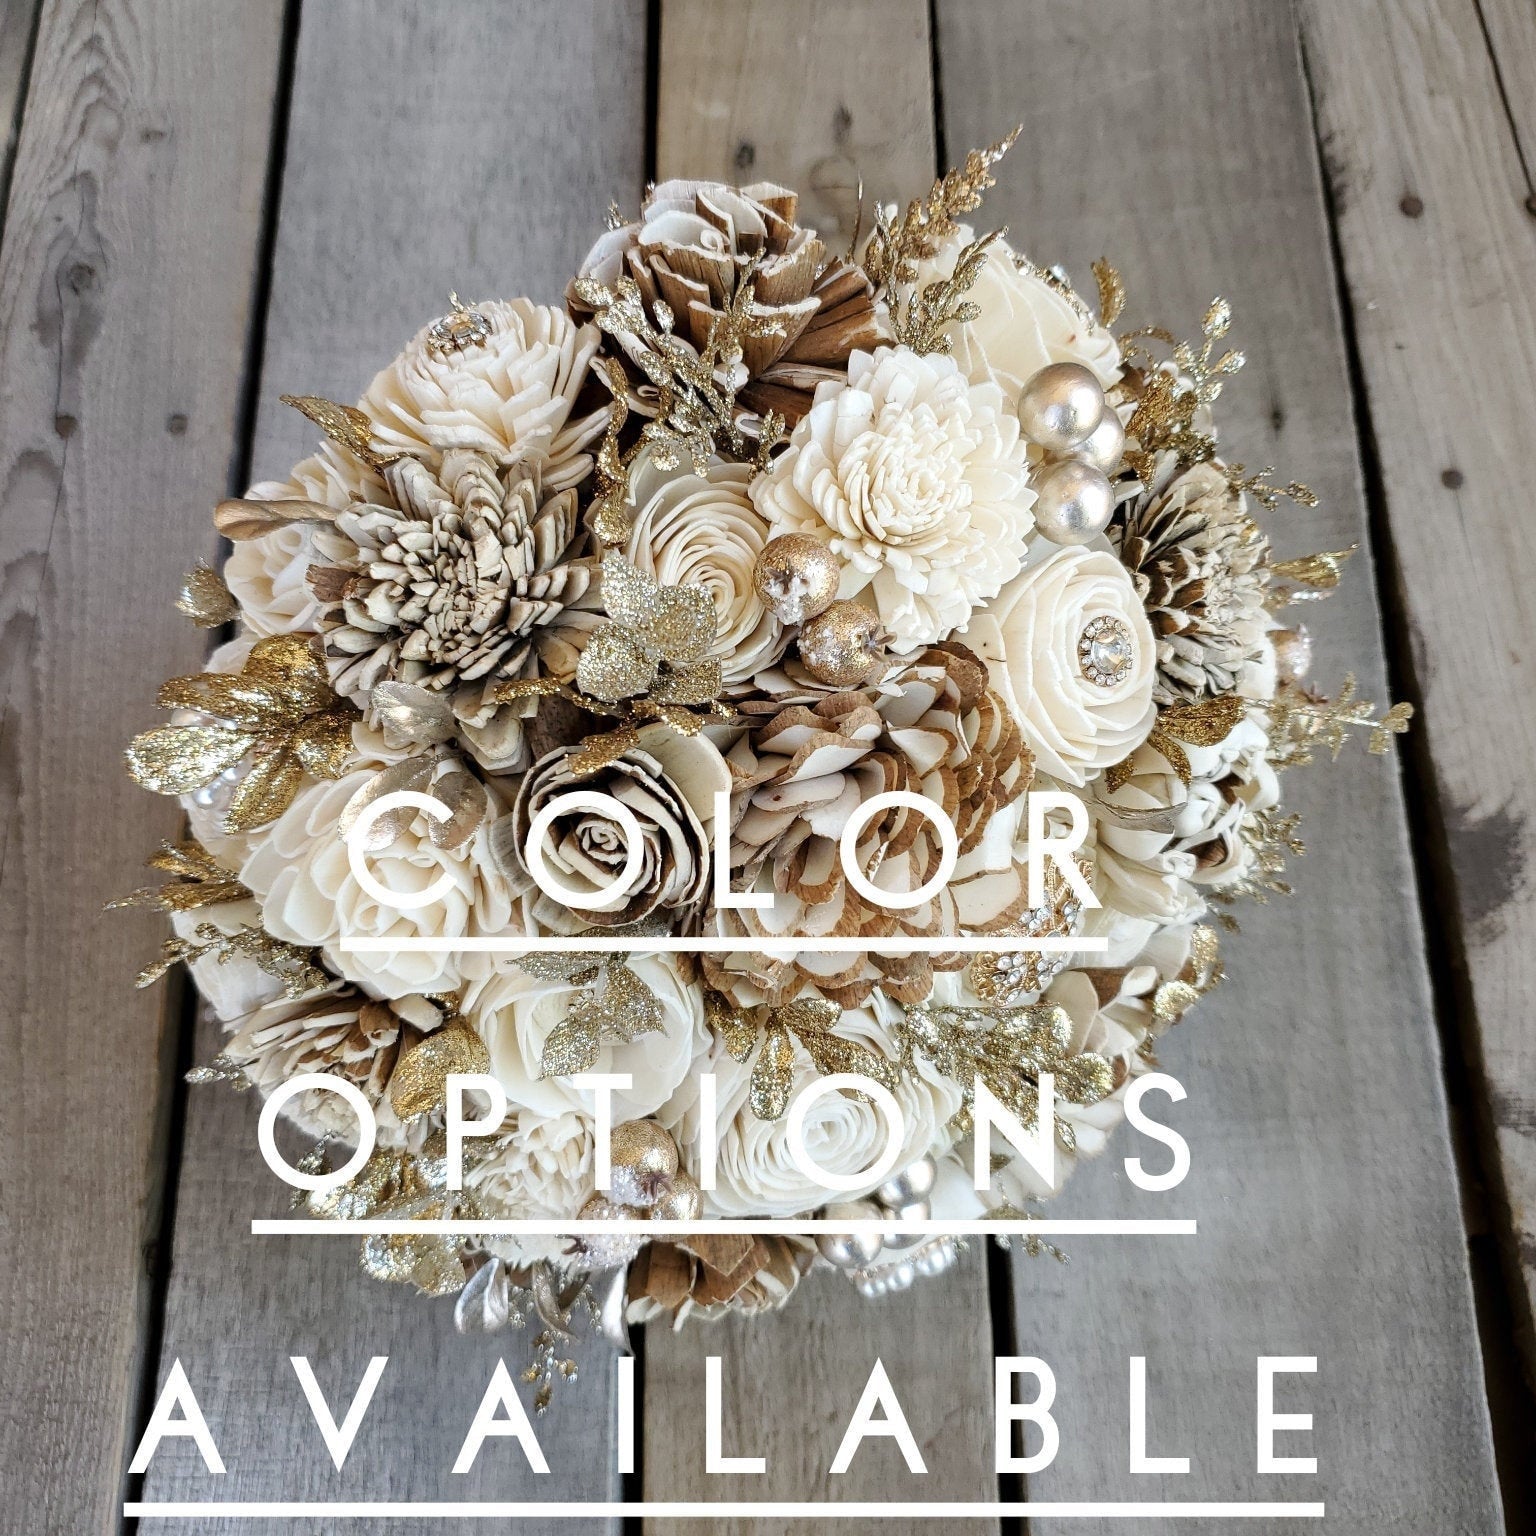 Gold Brooch and Glitter Sola Wood Flower Bouquet with Cream and Natural Bark Flowers, Color Options Available